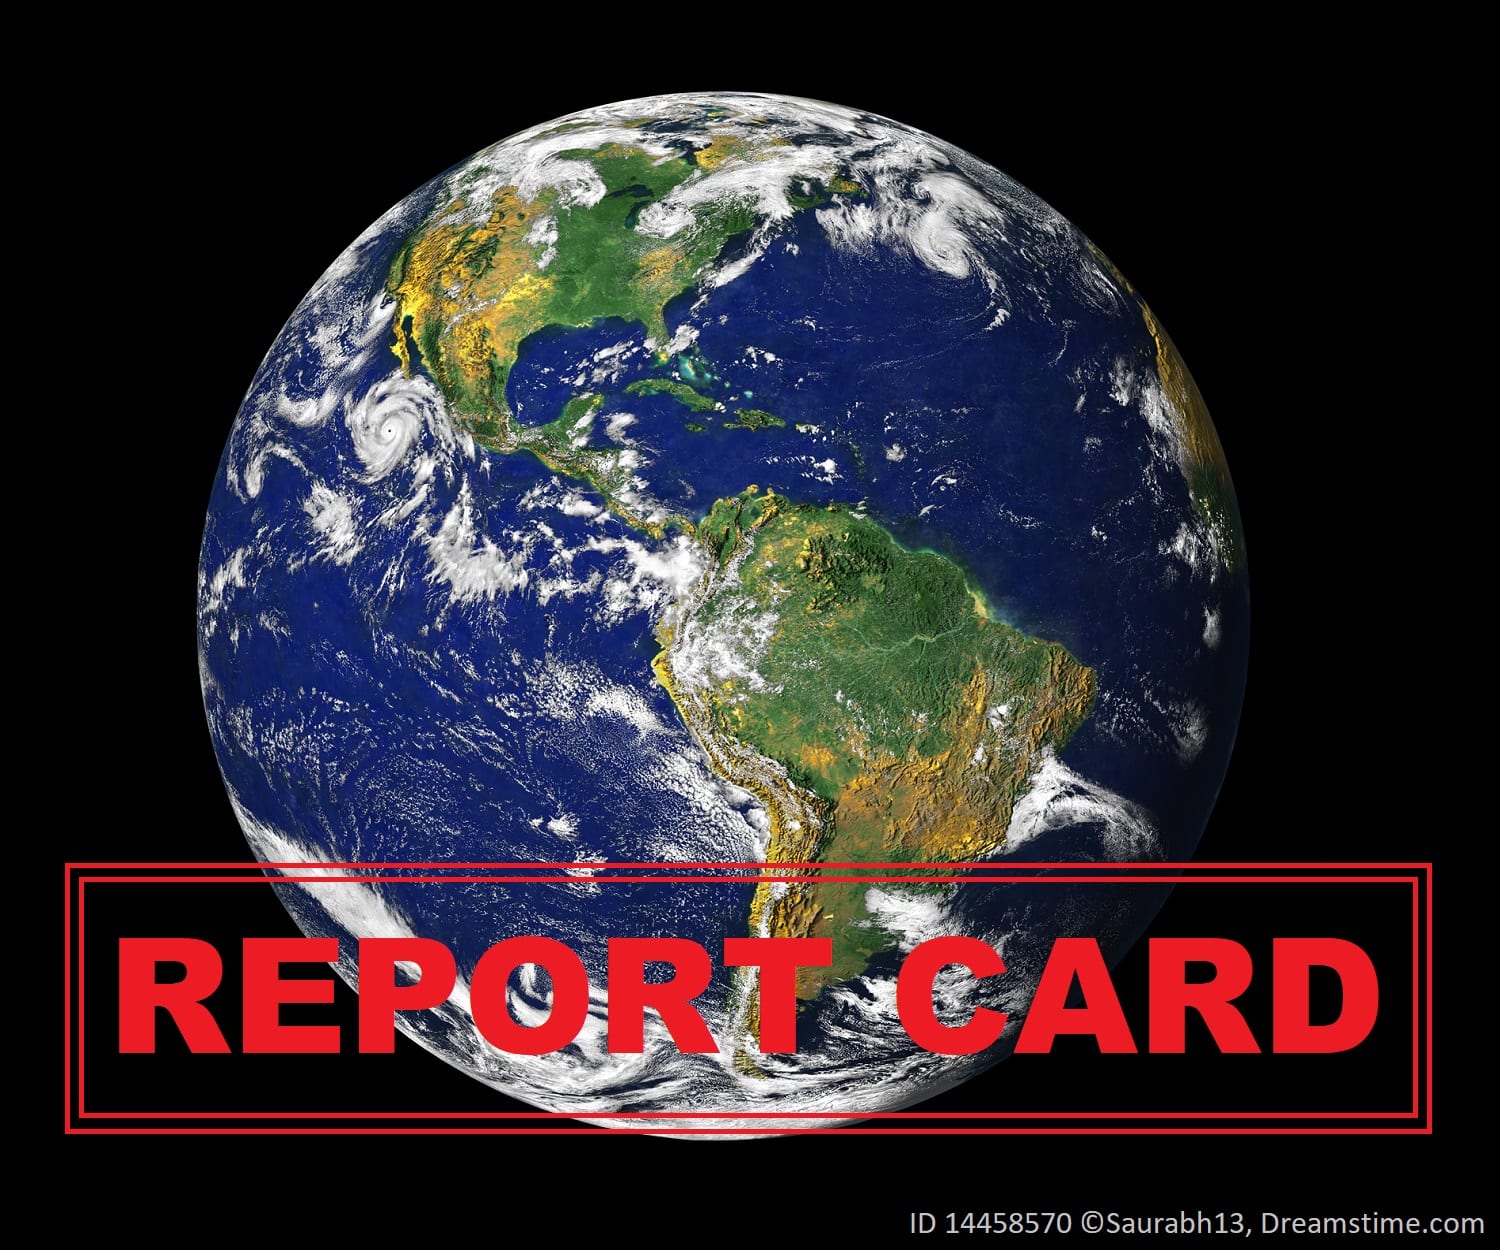 Student create a report card for the Earth, by gauging the health of the planet